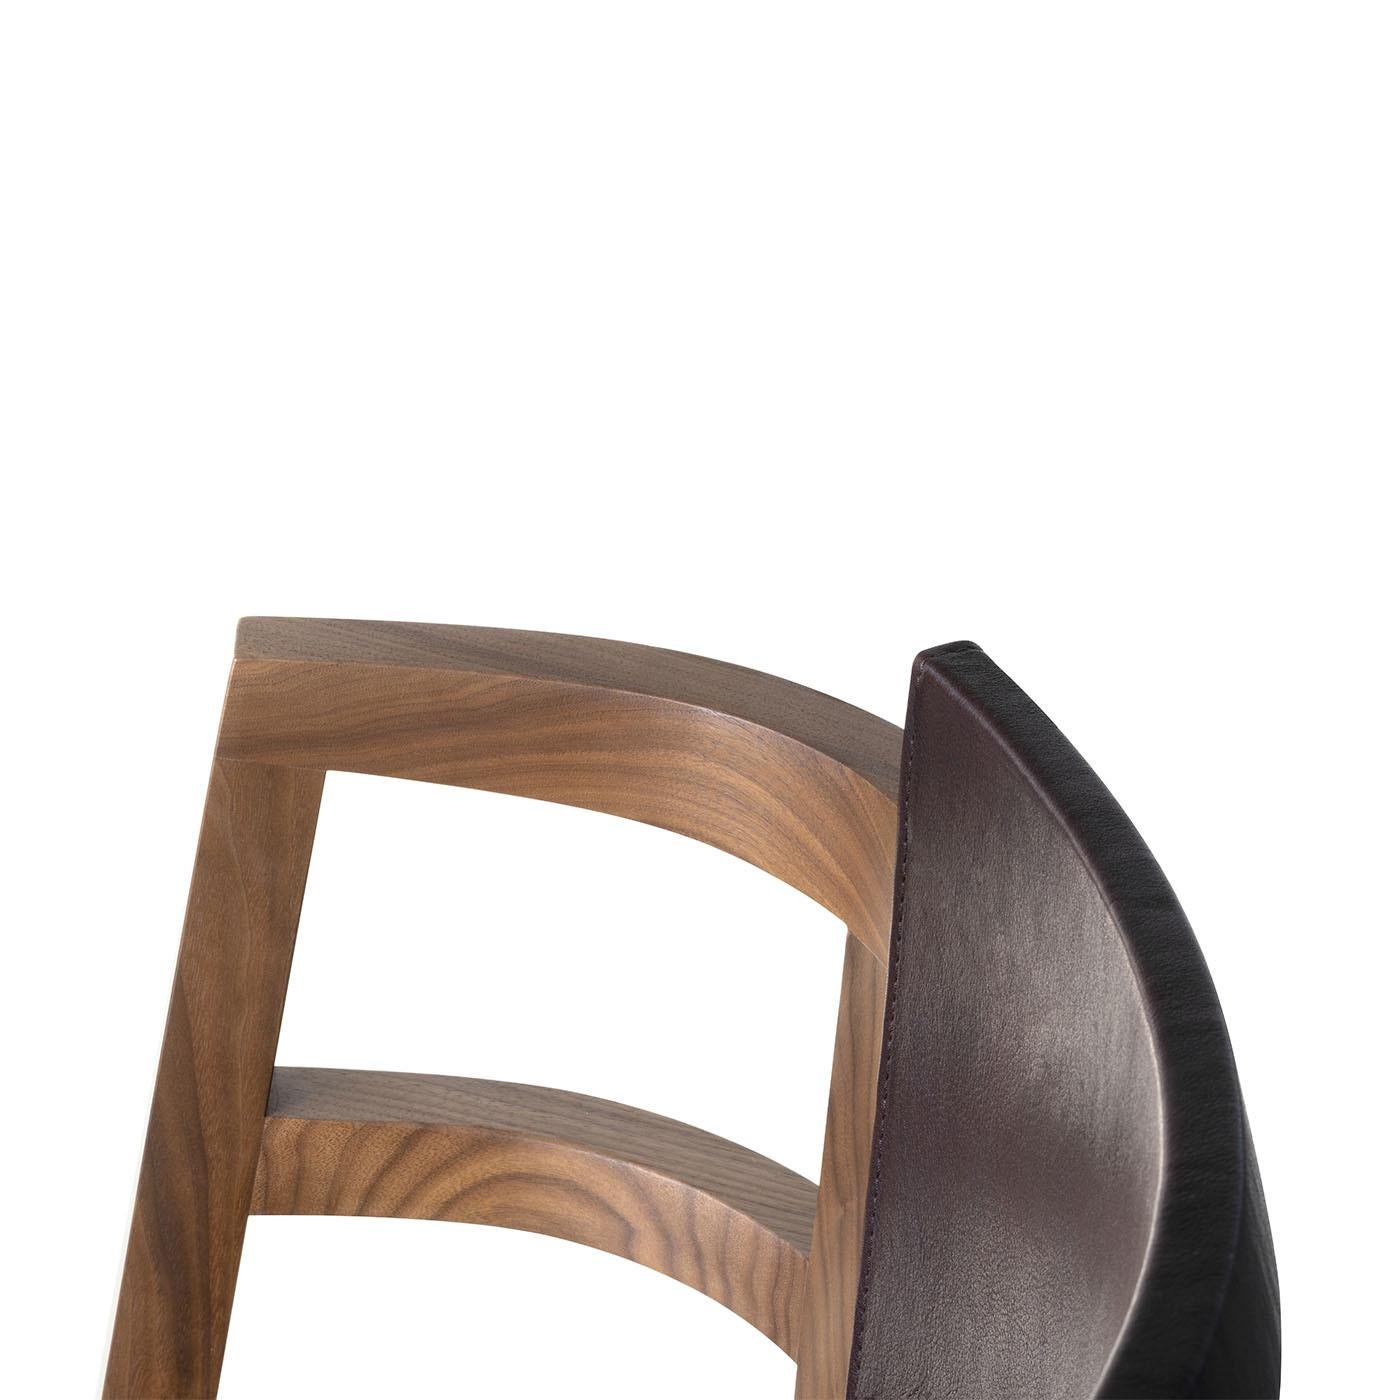 Dama small armchair is designed by Enrico Tonucci and it's characterized by minimalist lines inspired by the image of a pastime dame dressed in crinoline. It’s made of solid black walnut wood with the back and the seat in leather. Also available in